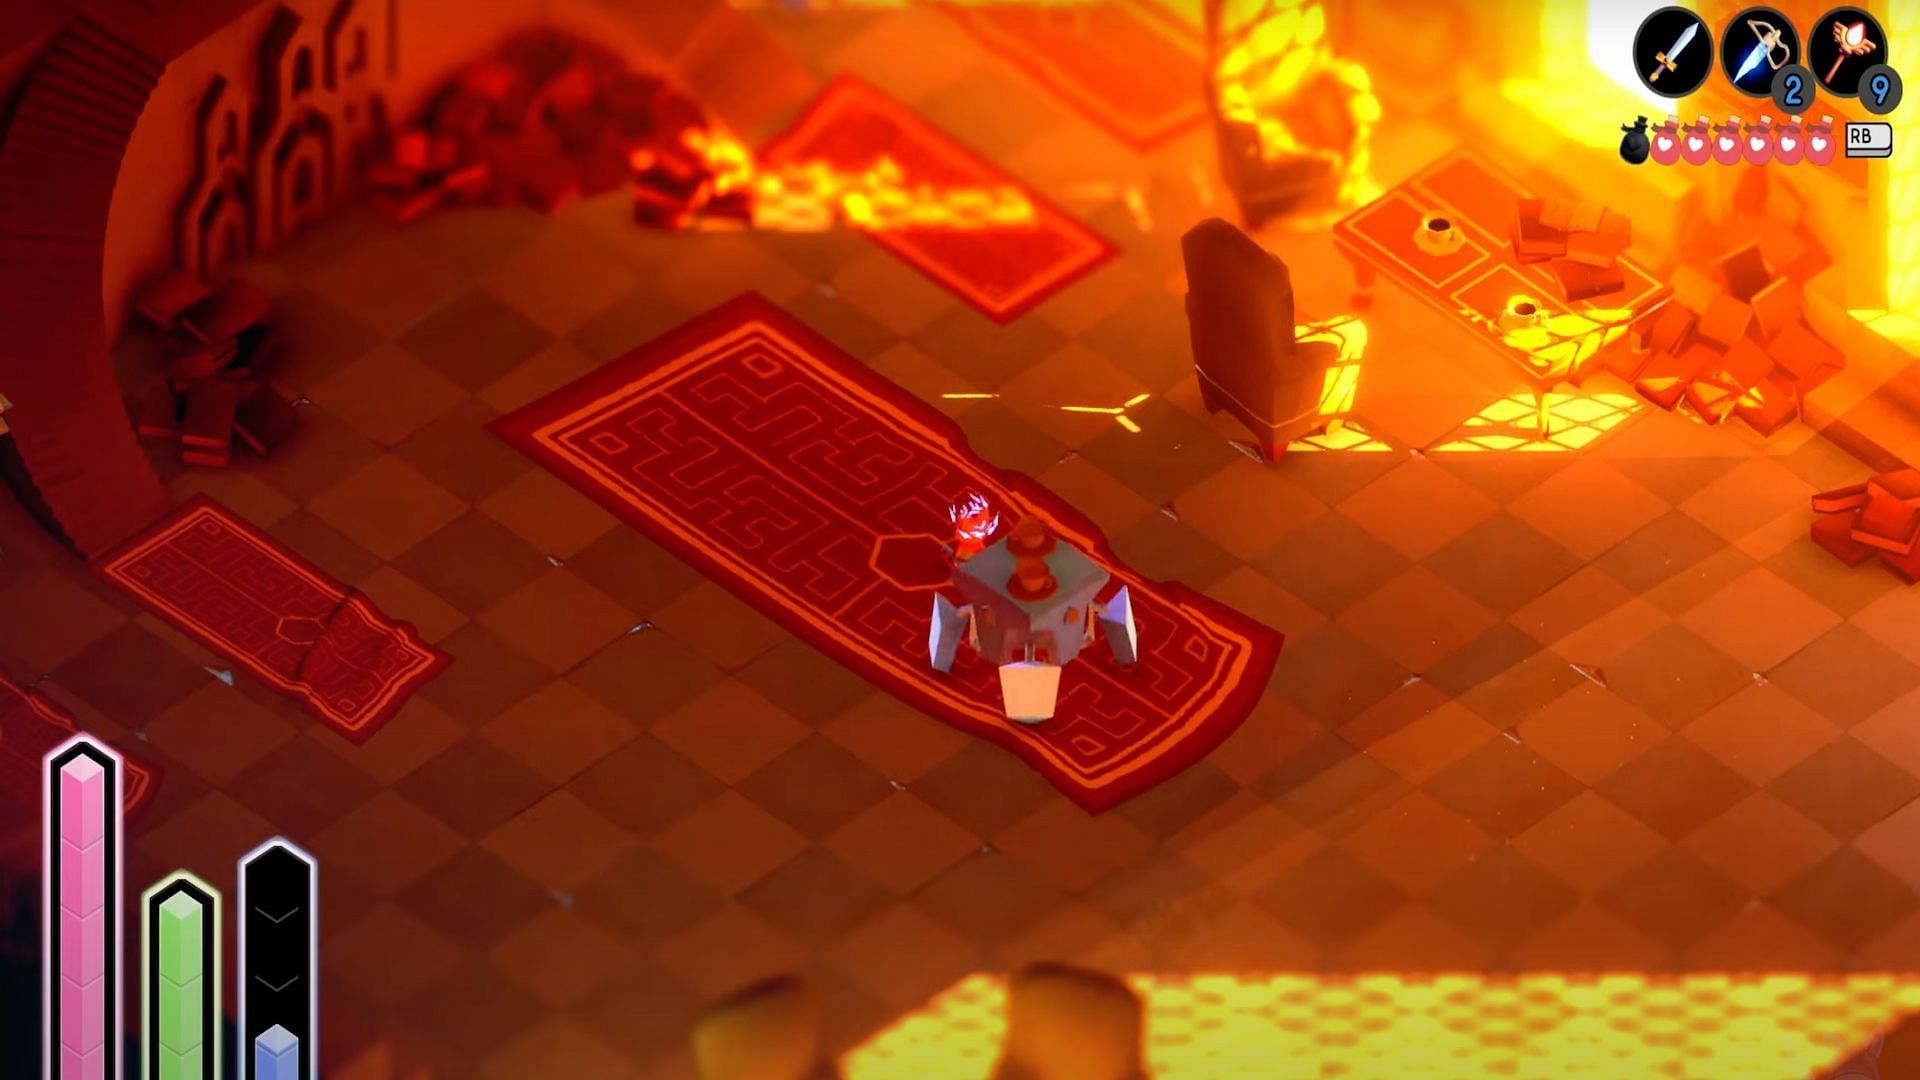 Players of TUNIC can find a special secret fairy inside the library (Image via BattleBunny/YouTube)